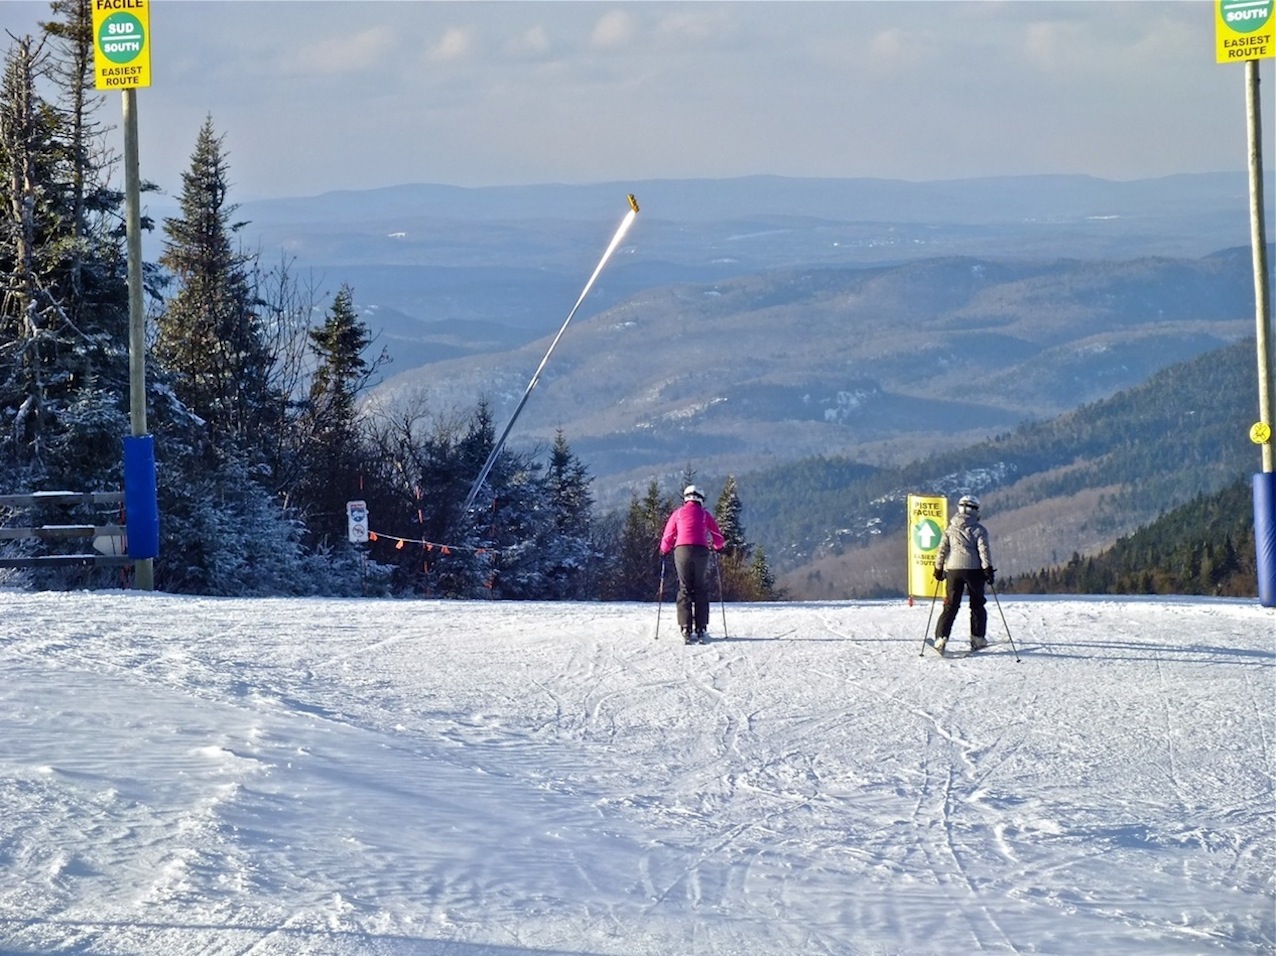 www.tremblant360.com photo. All rights reserved.